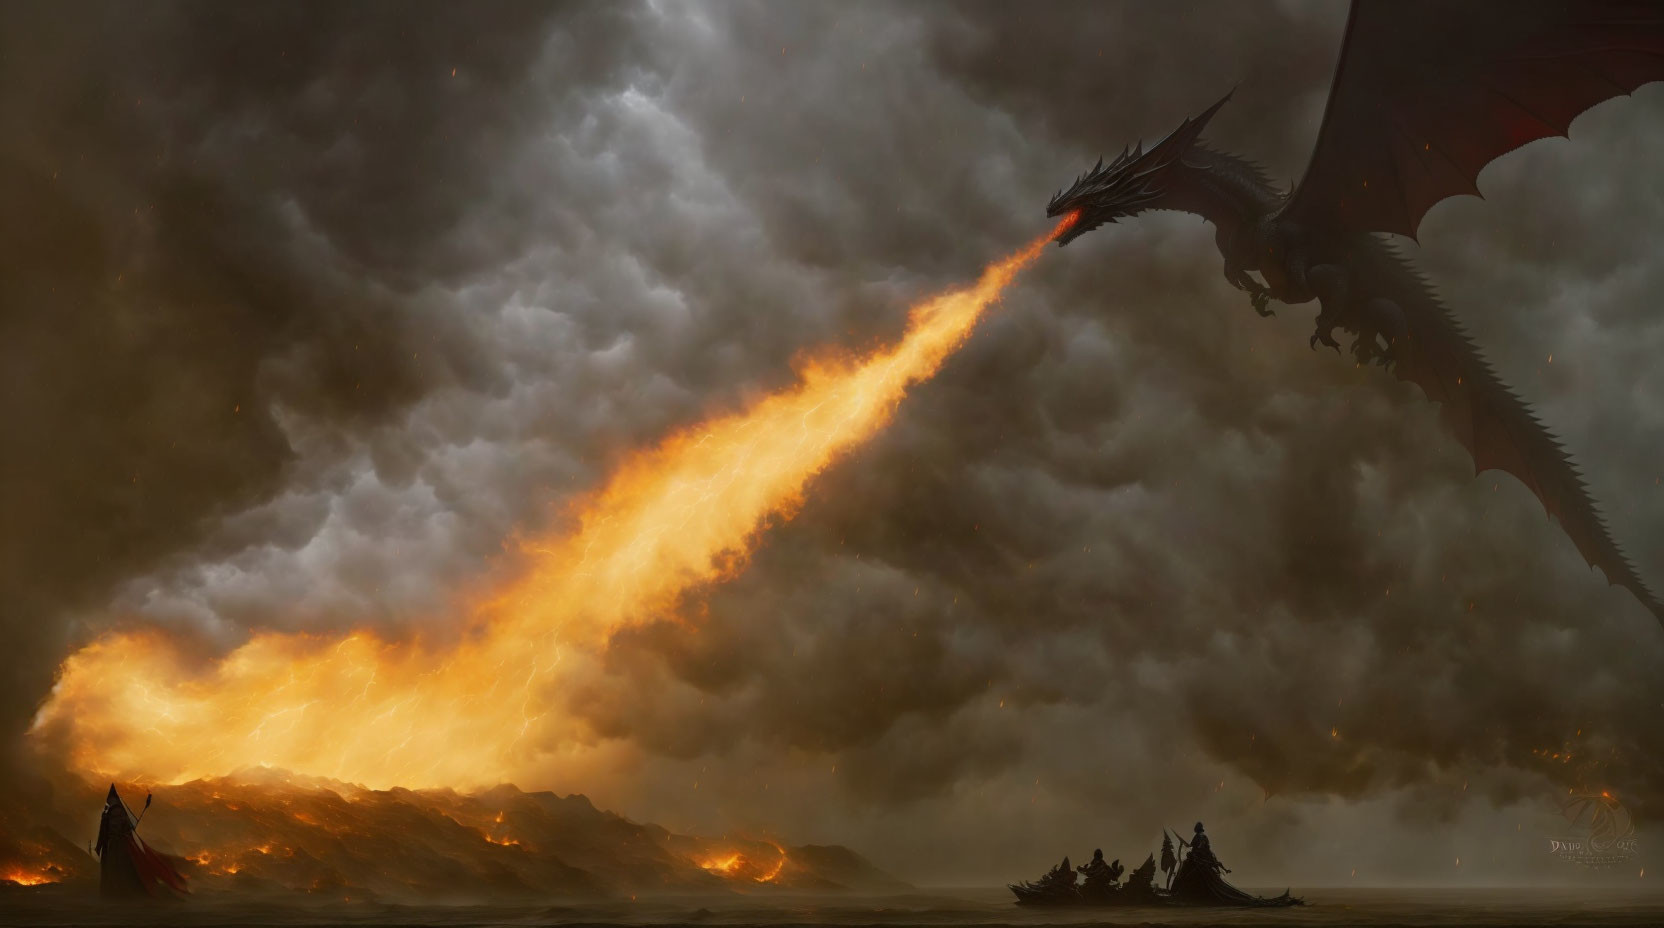 Majestic dragon breathing fire over stormy seas with figures in boat and on land.